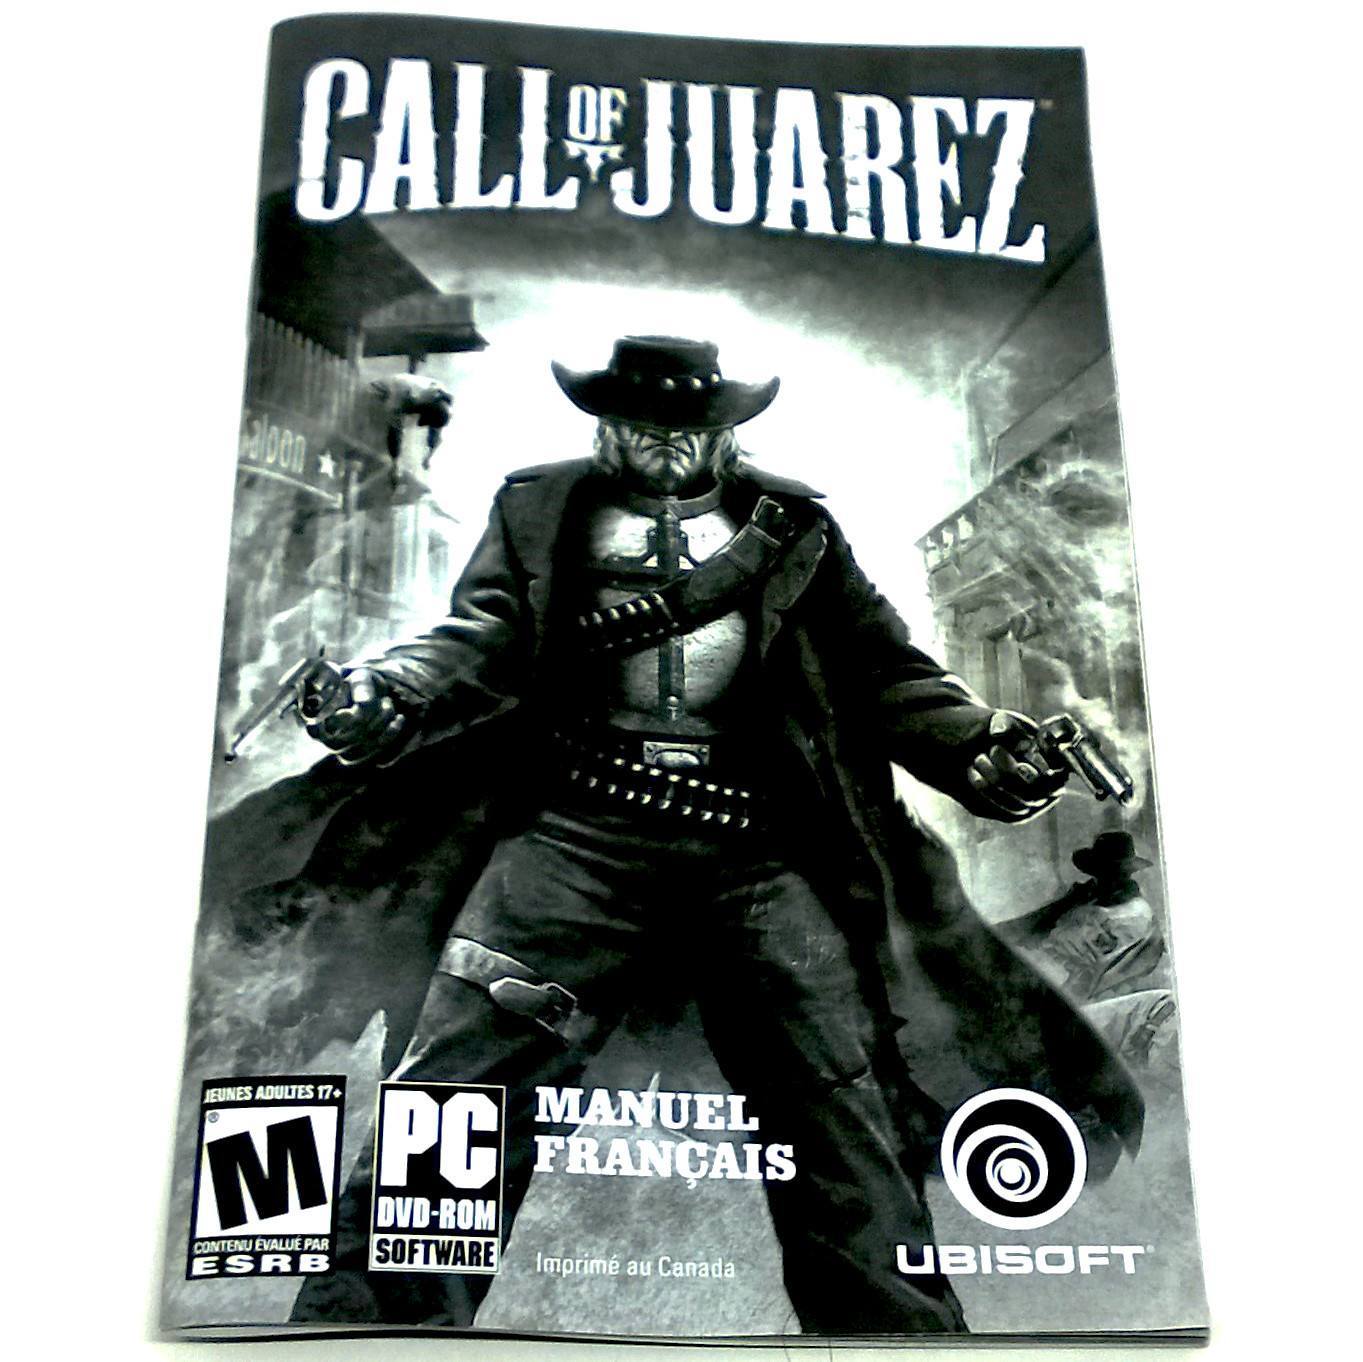 Call of Juarez for PC DVD-ROM - Back of manual